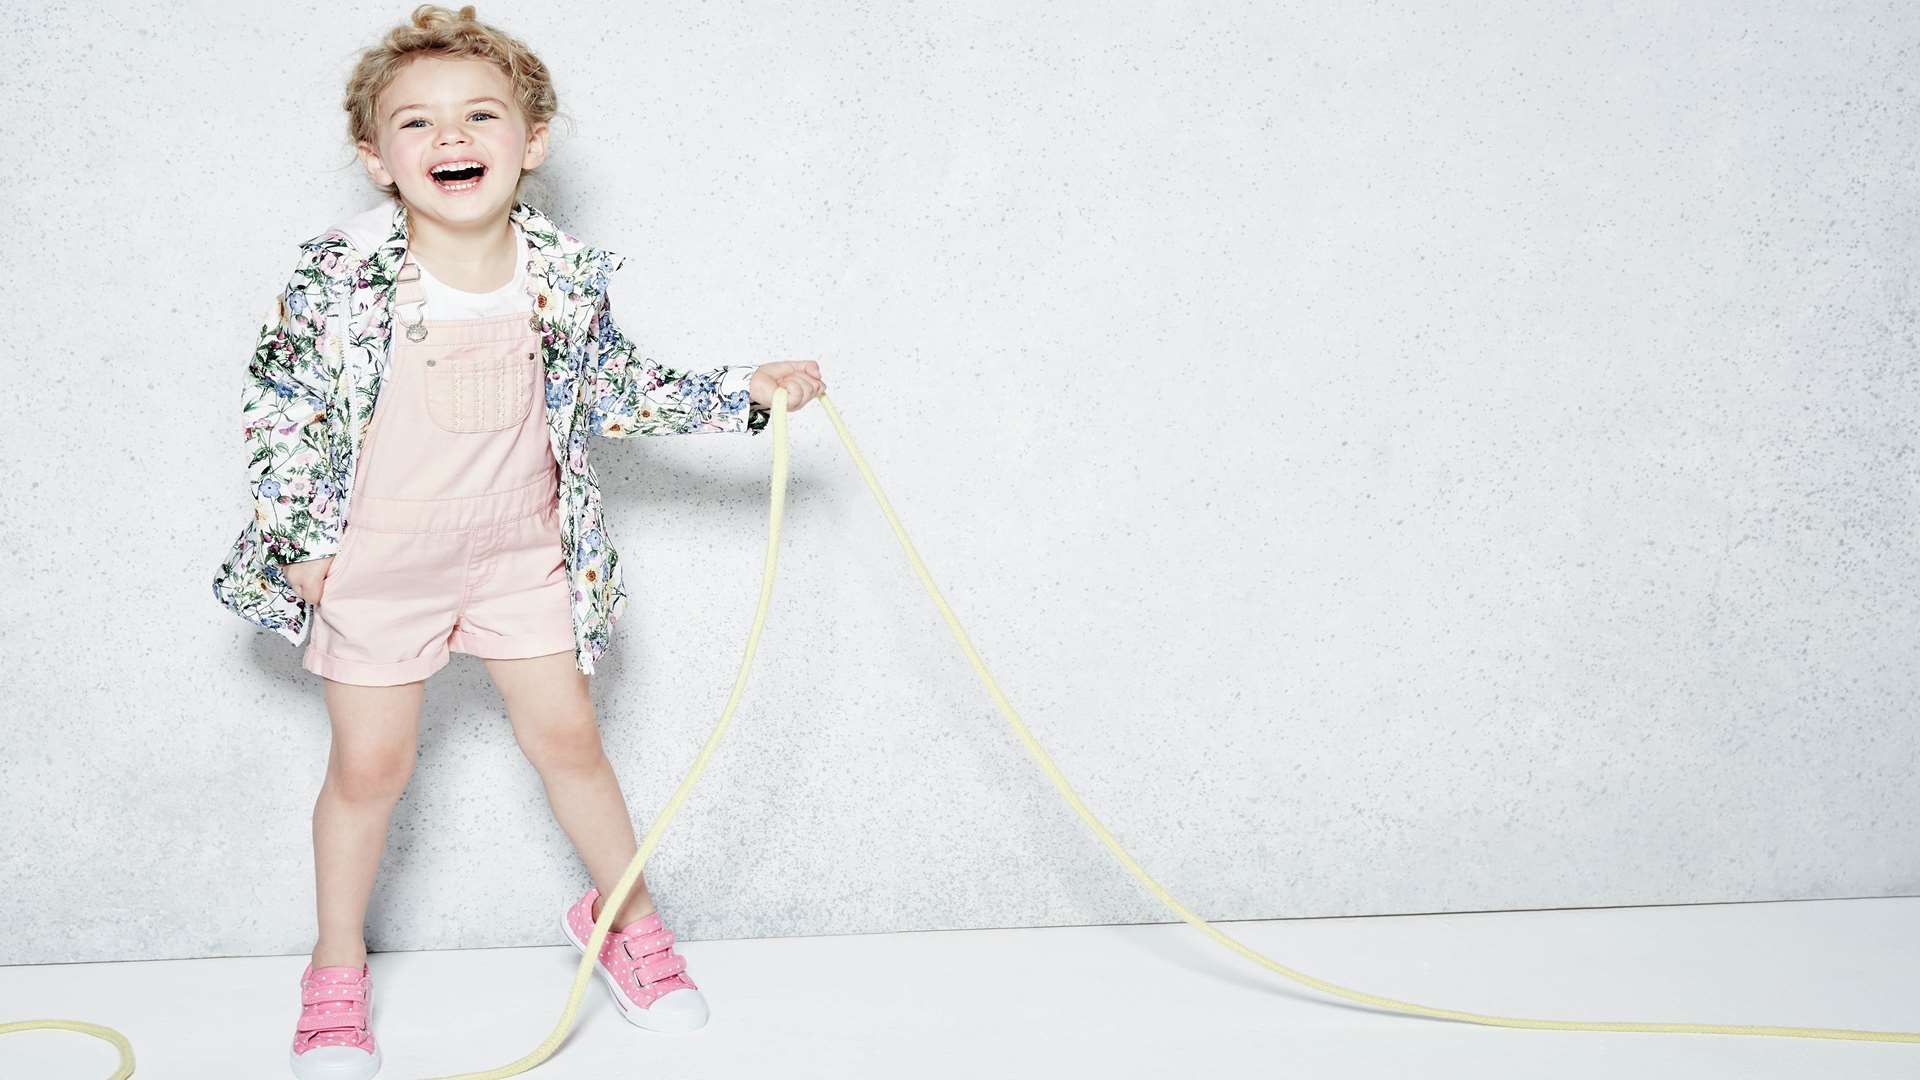 Printed mac from £11, pink dungaree set from £12 and canvas £6. all from F&F at Tesco.